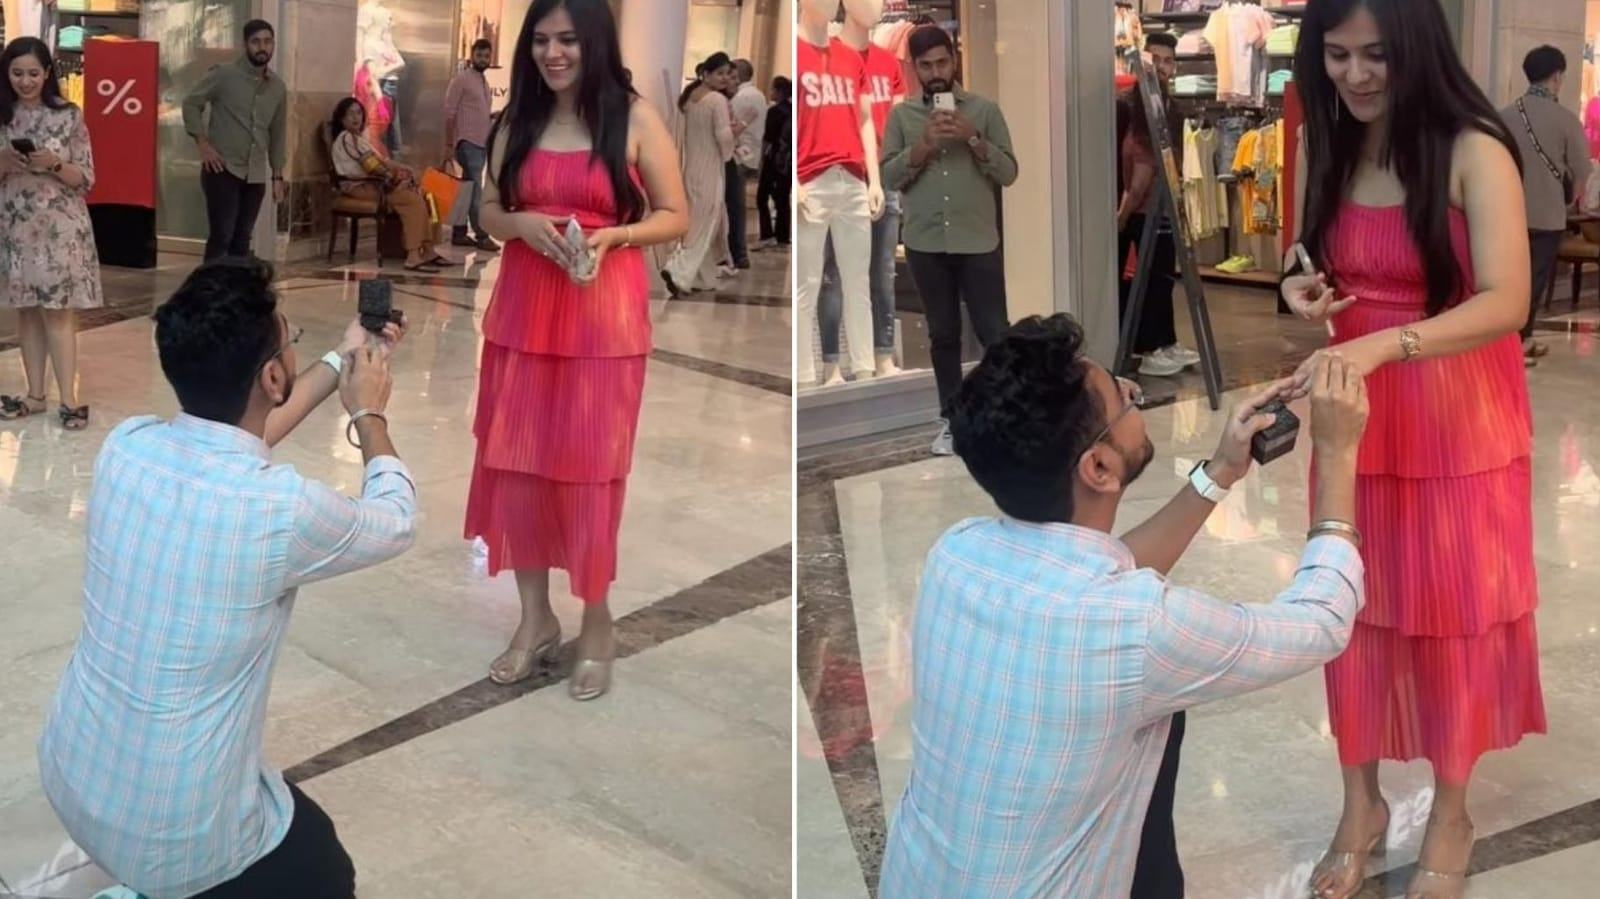 Man's adorable proposal at the mall leaves girlfriend in shock. Watch